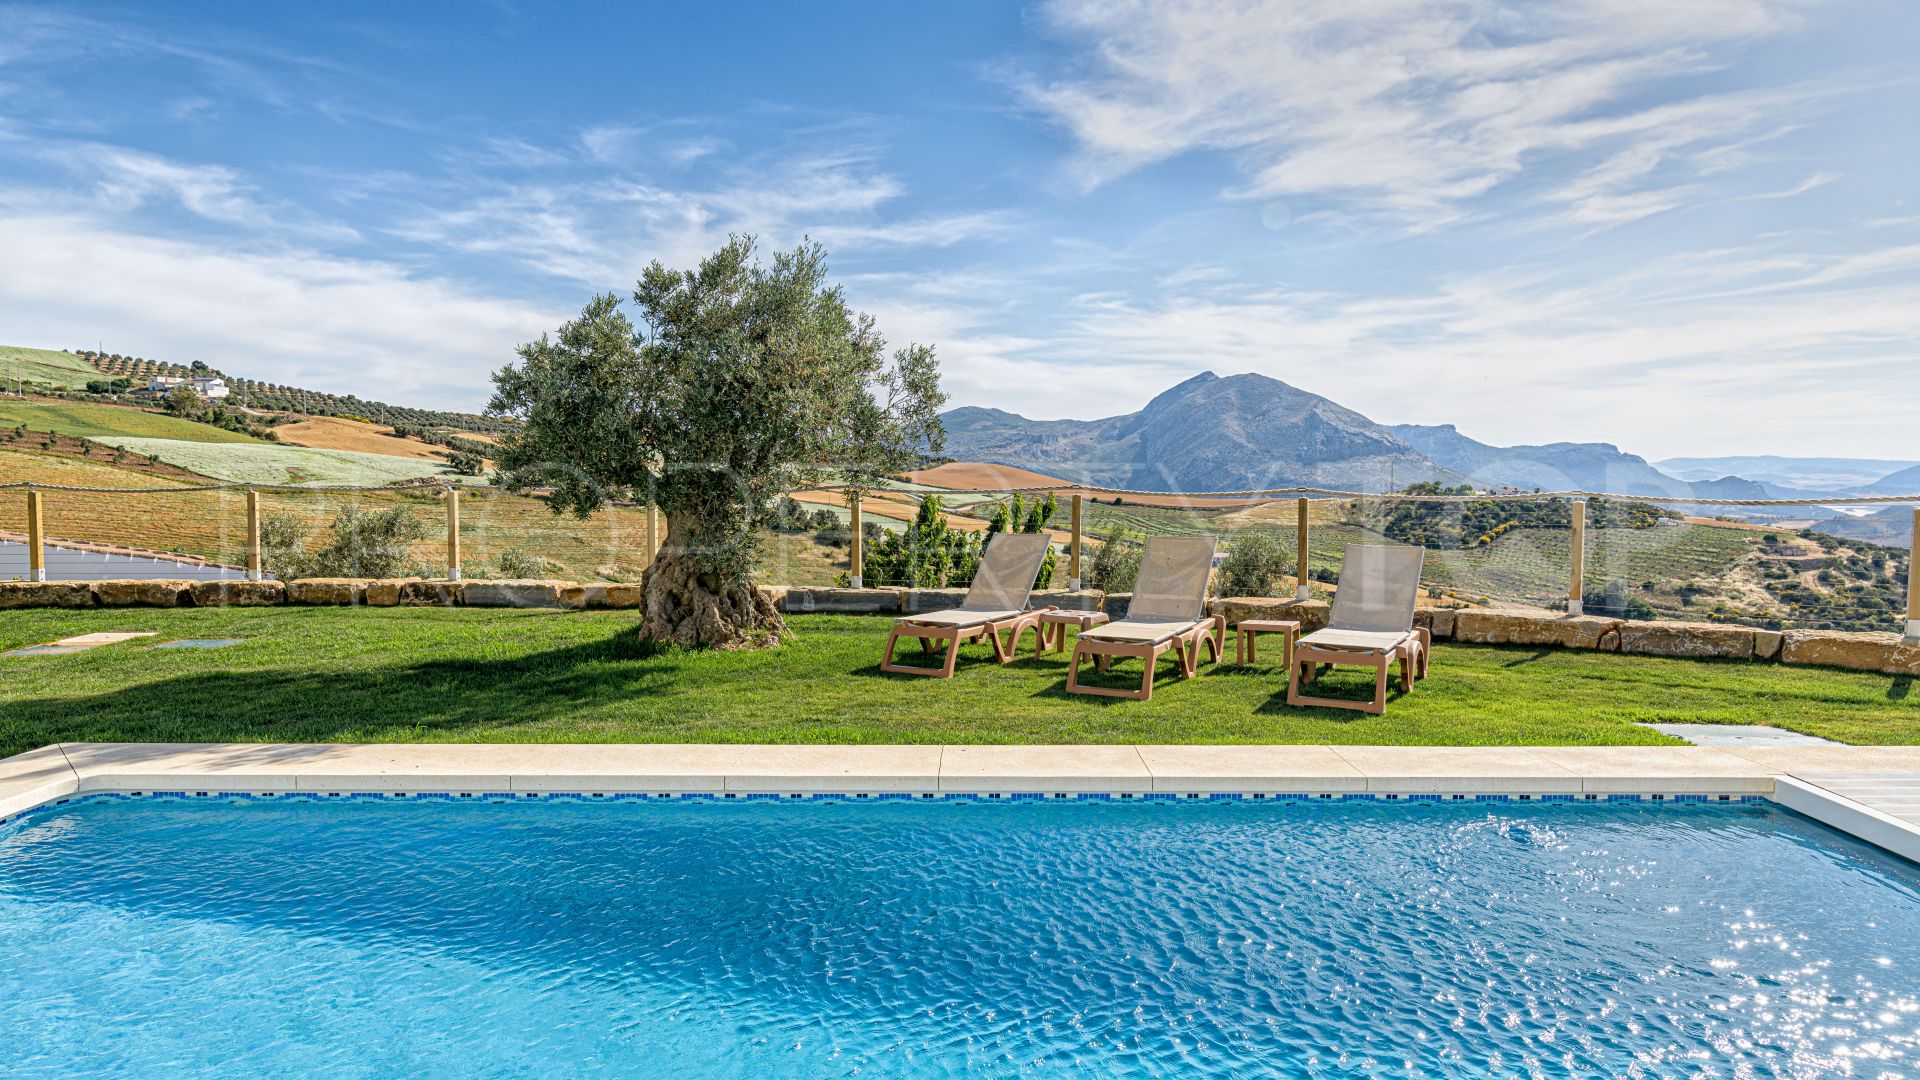 For sale Antequera 6 bedrooms finca